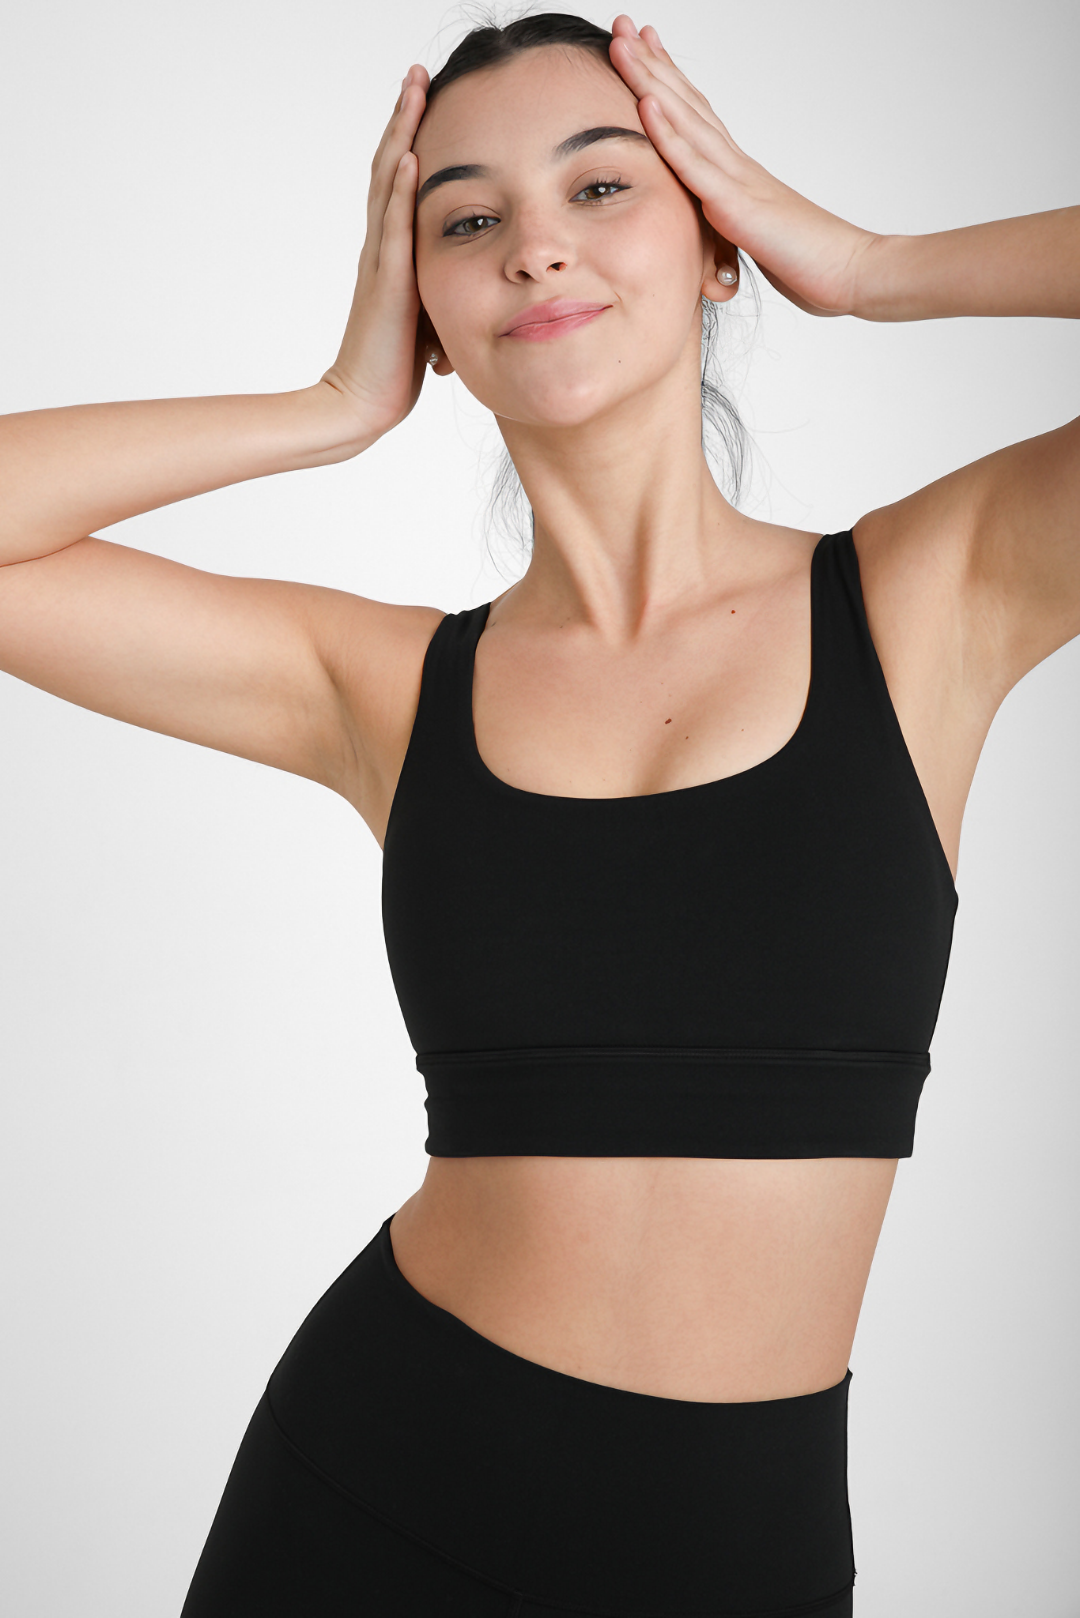 Premium Yoga & Pilates Bras for Comfort and Support